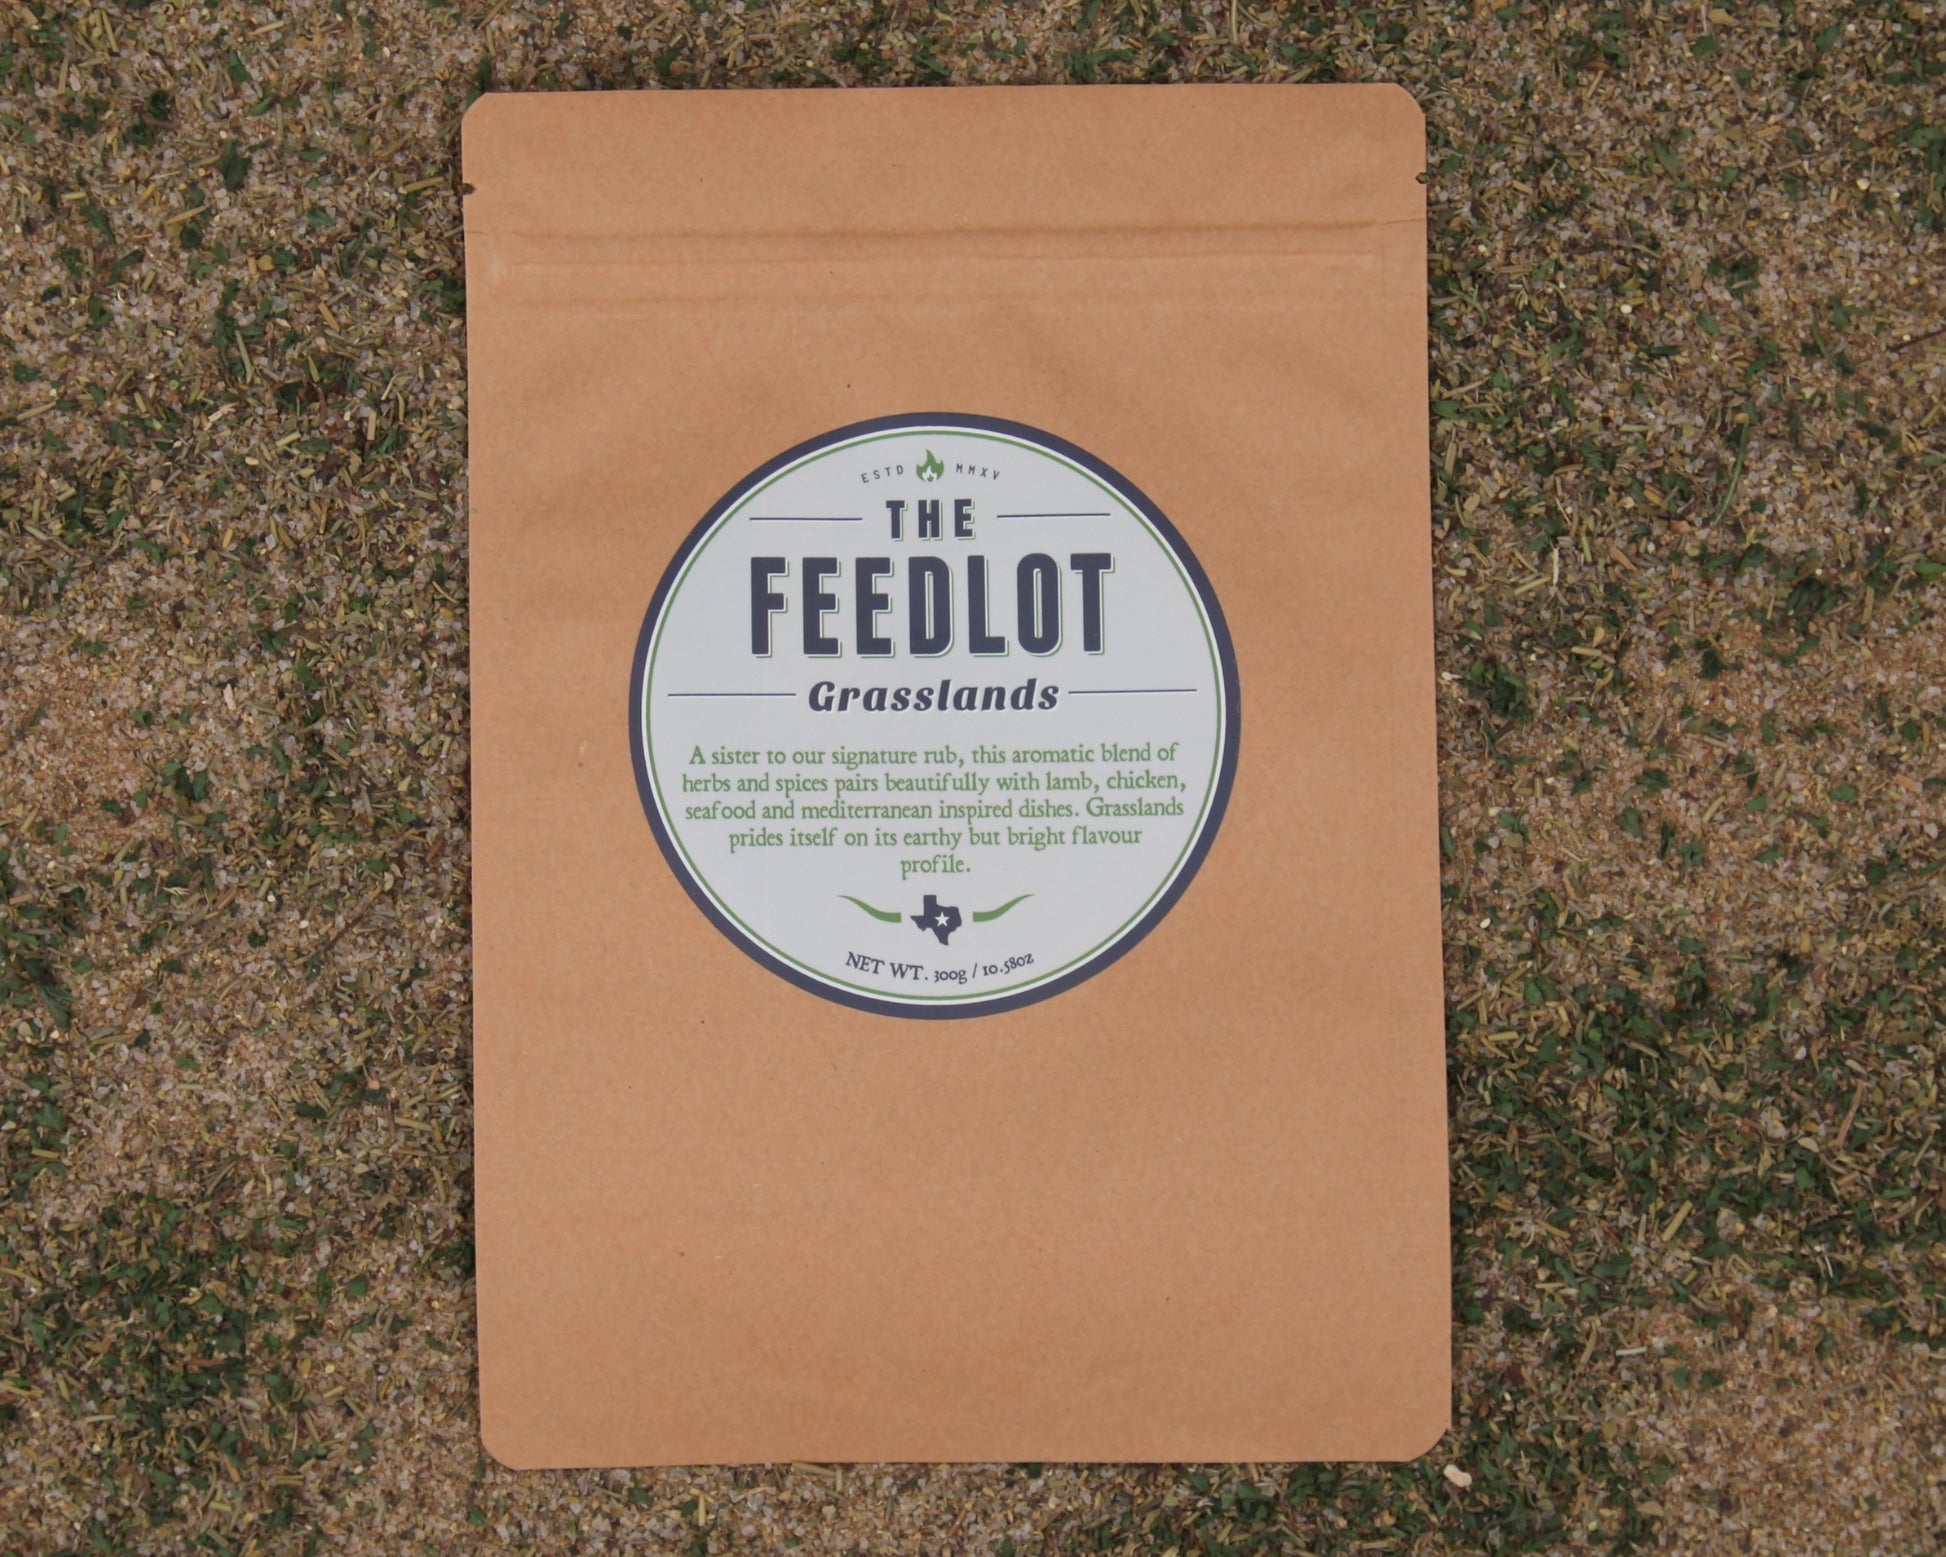 A brown paper package labeled "The Feedlot Grasslands" rests on grass. The label describes the blend as a mix of Mediterranean herbs and spices for beef, lamb, chicken, seafood, and vegetables. The package contains 240 grams or 8.46 ounces.